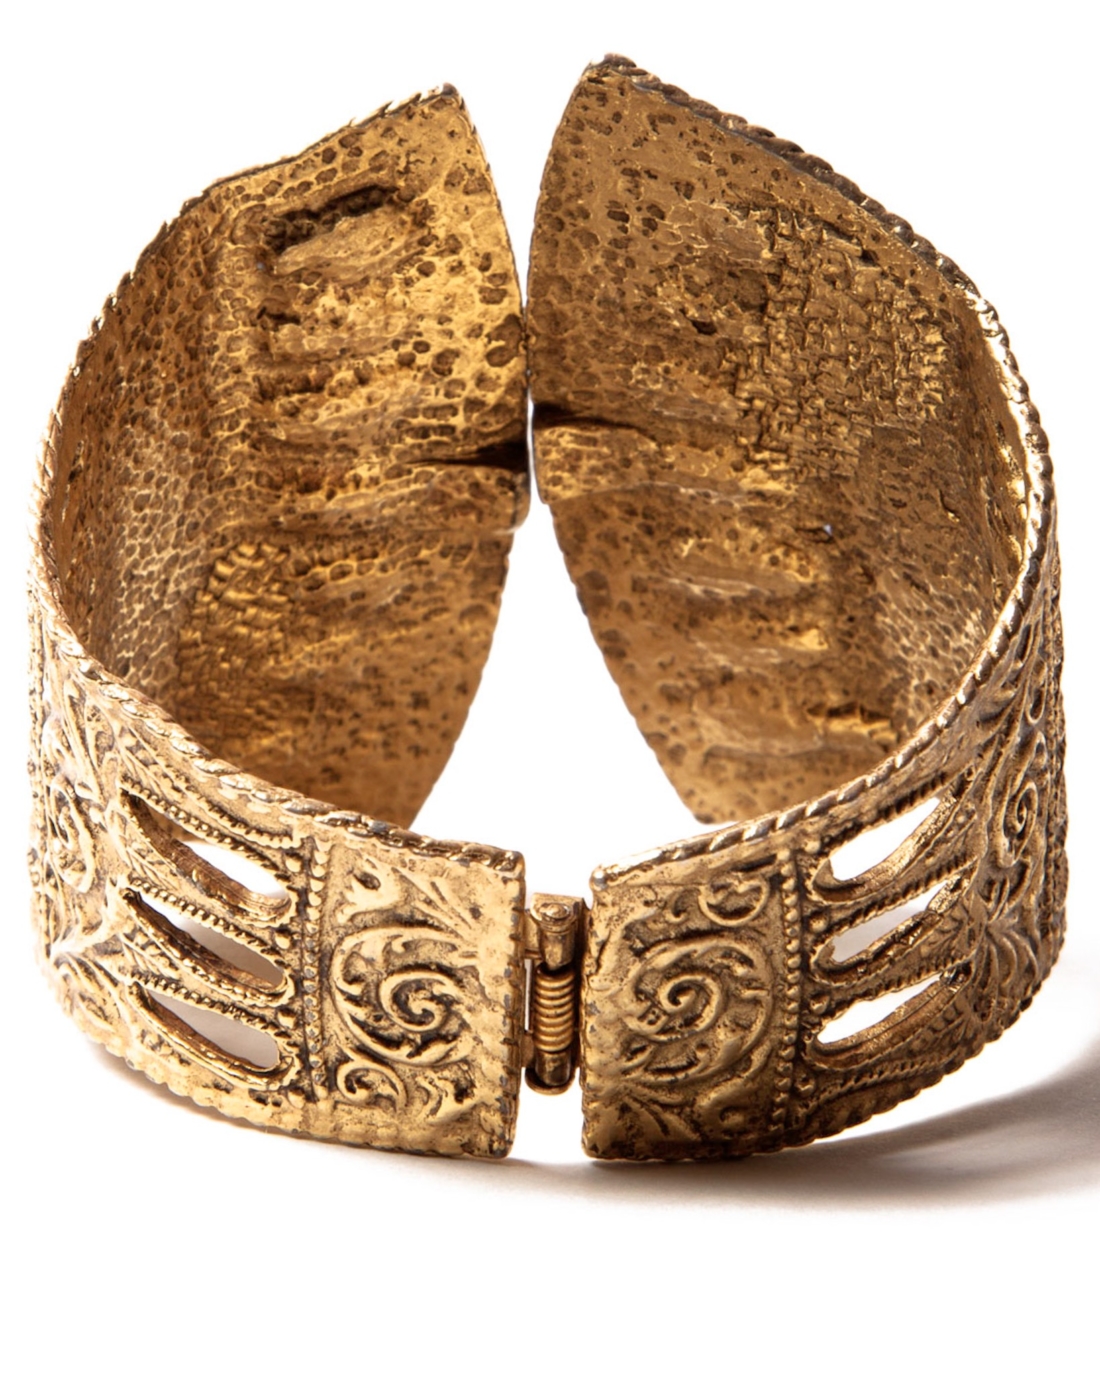 Egyptian Revival Gold Hinged Cuff Bracelet, By Hobe, circa 1960’s